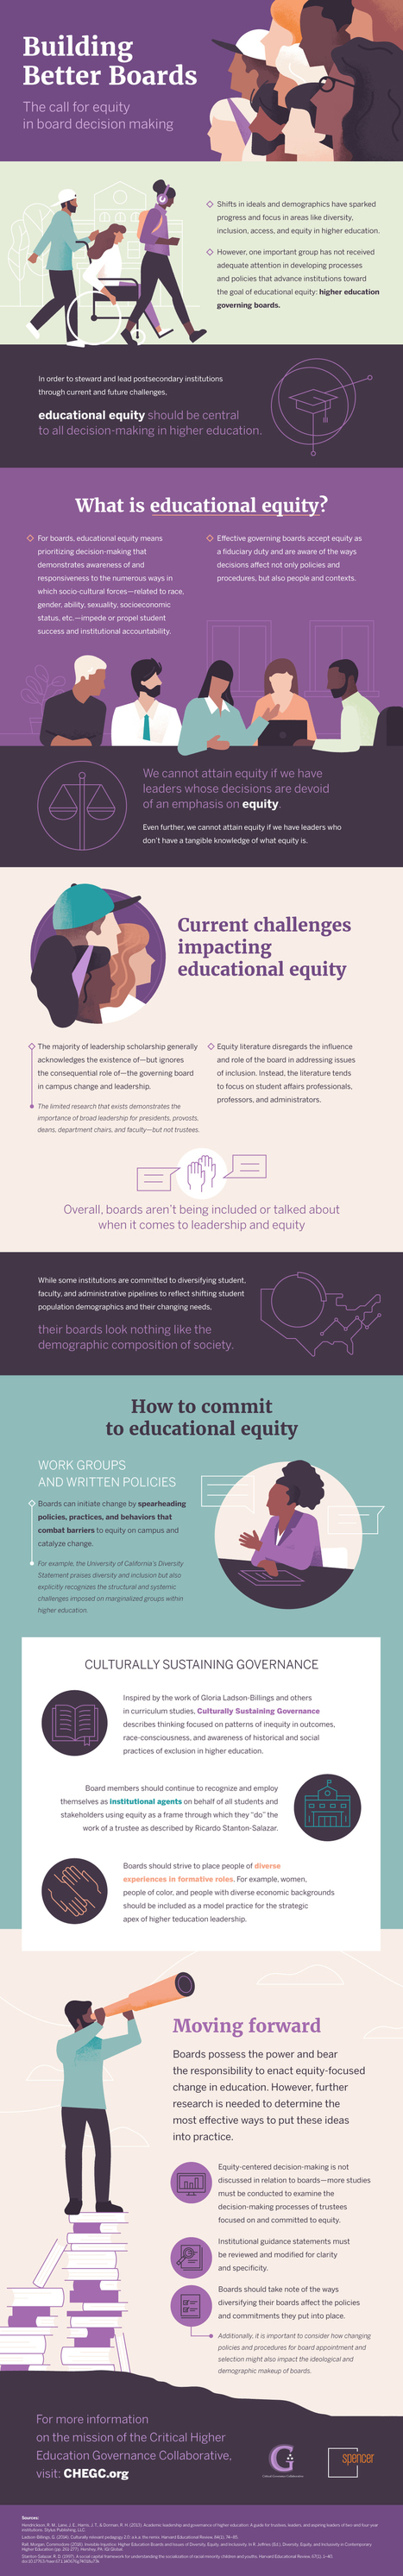 Building Better Boards: The Call for Equity in Board Decision Making - #Infographics | Education 2.0 & 3.0 | Scoop.it